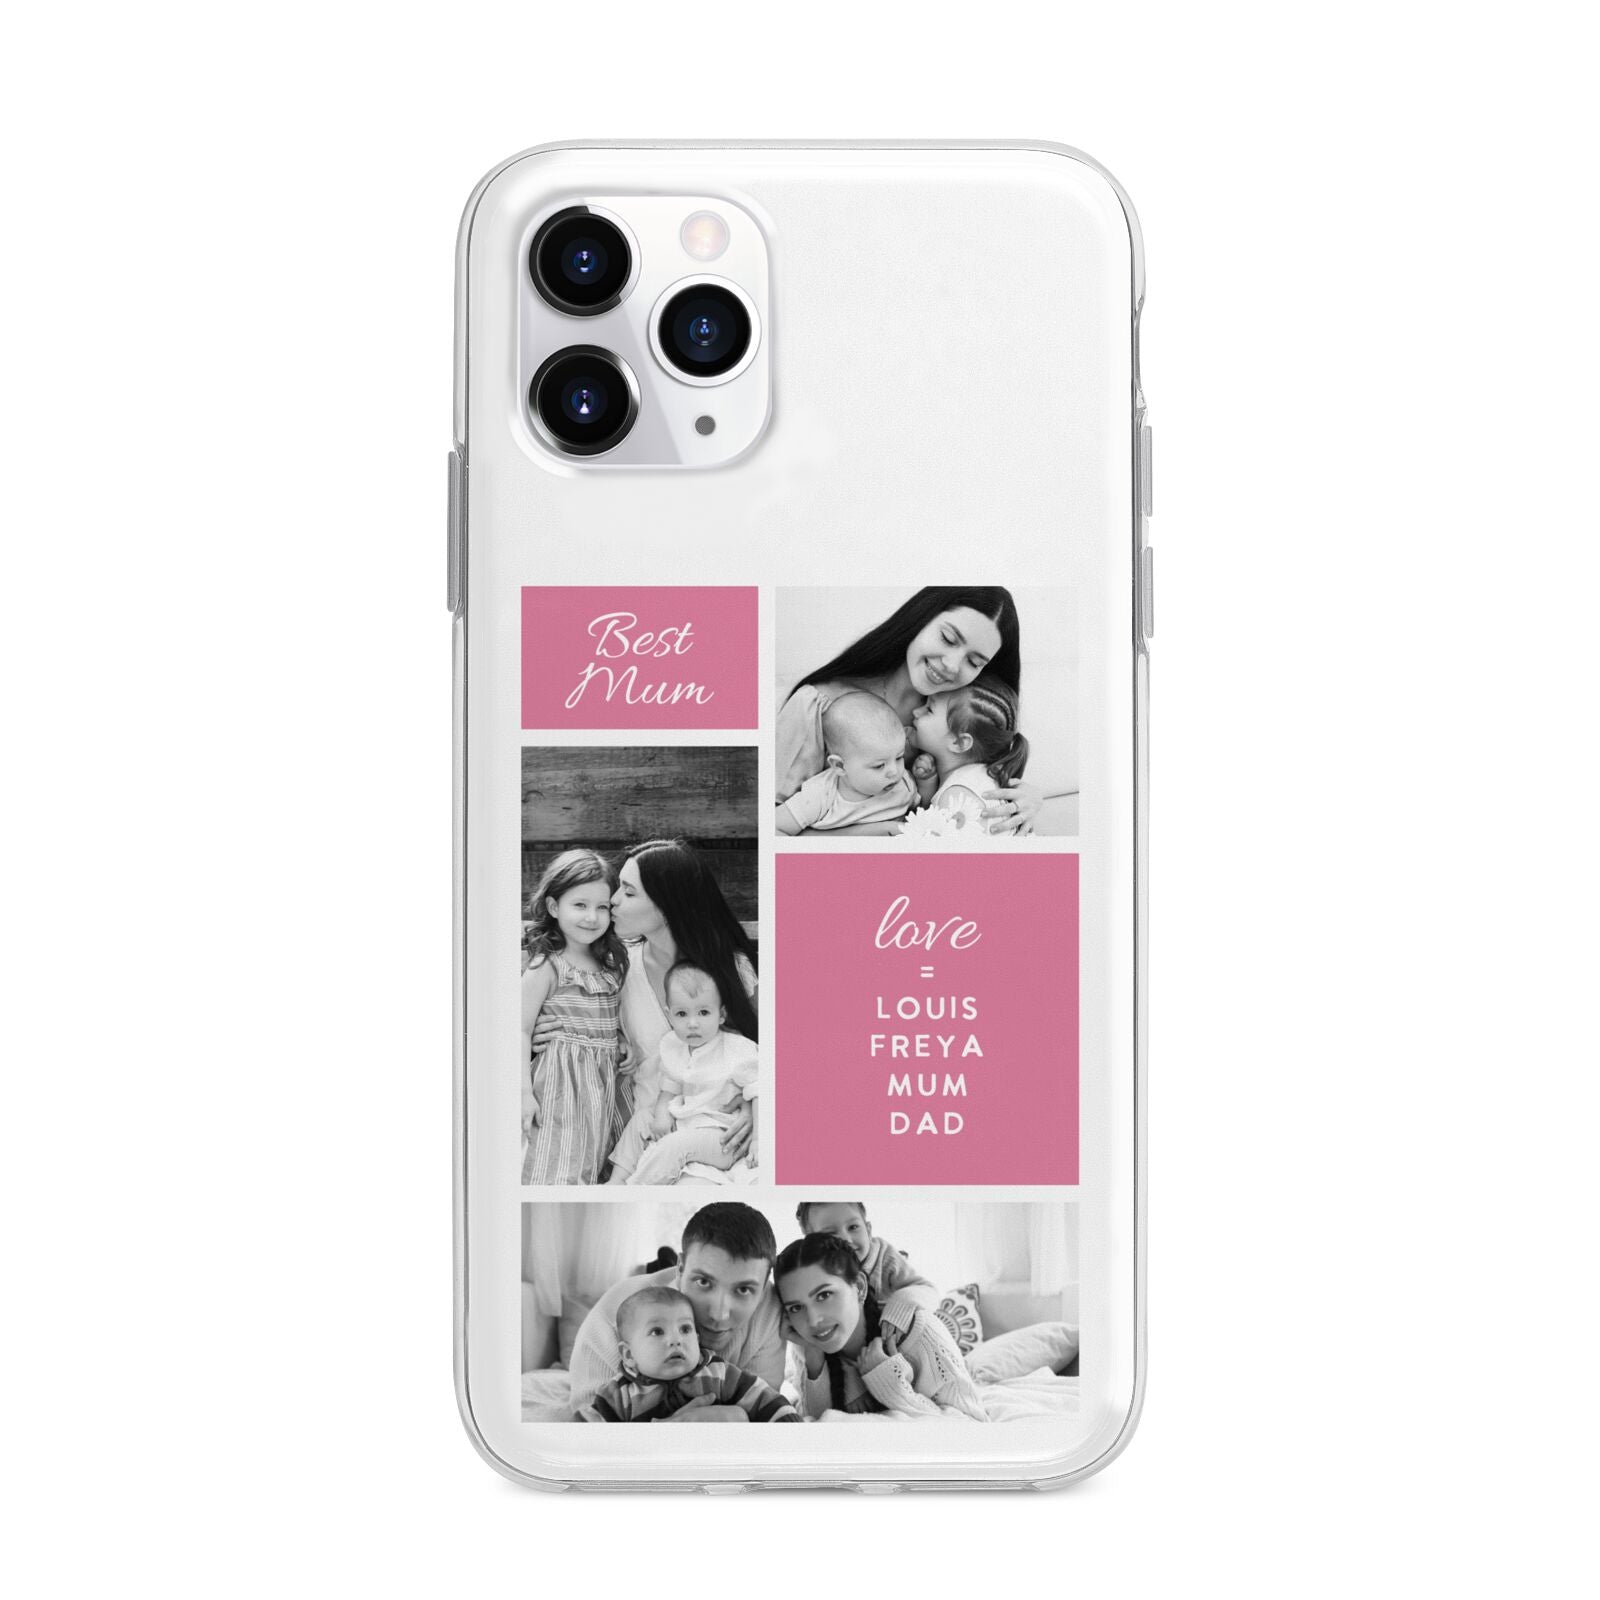 Best Mum Photo Collage Personalised Apple iPhone 11 Pro Max in Silver with Bumper Case